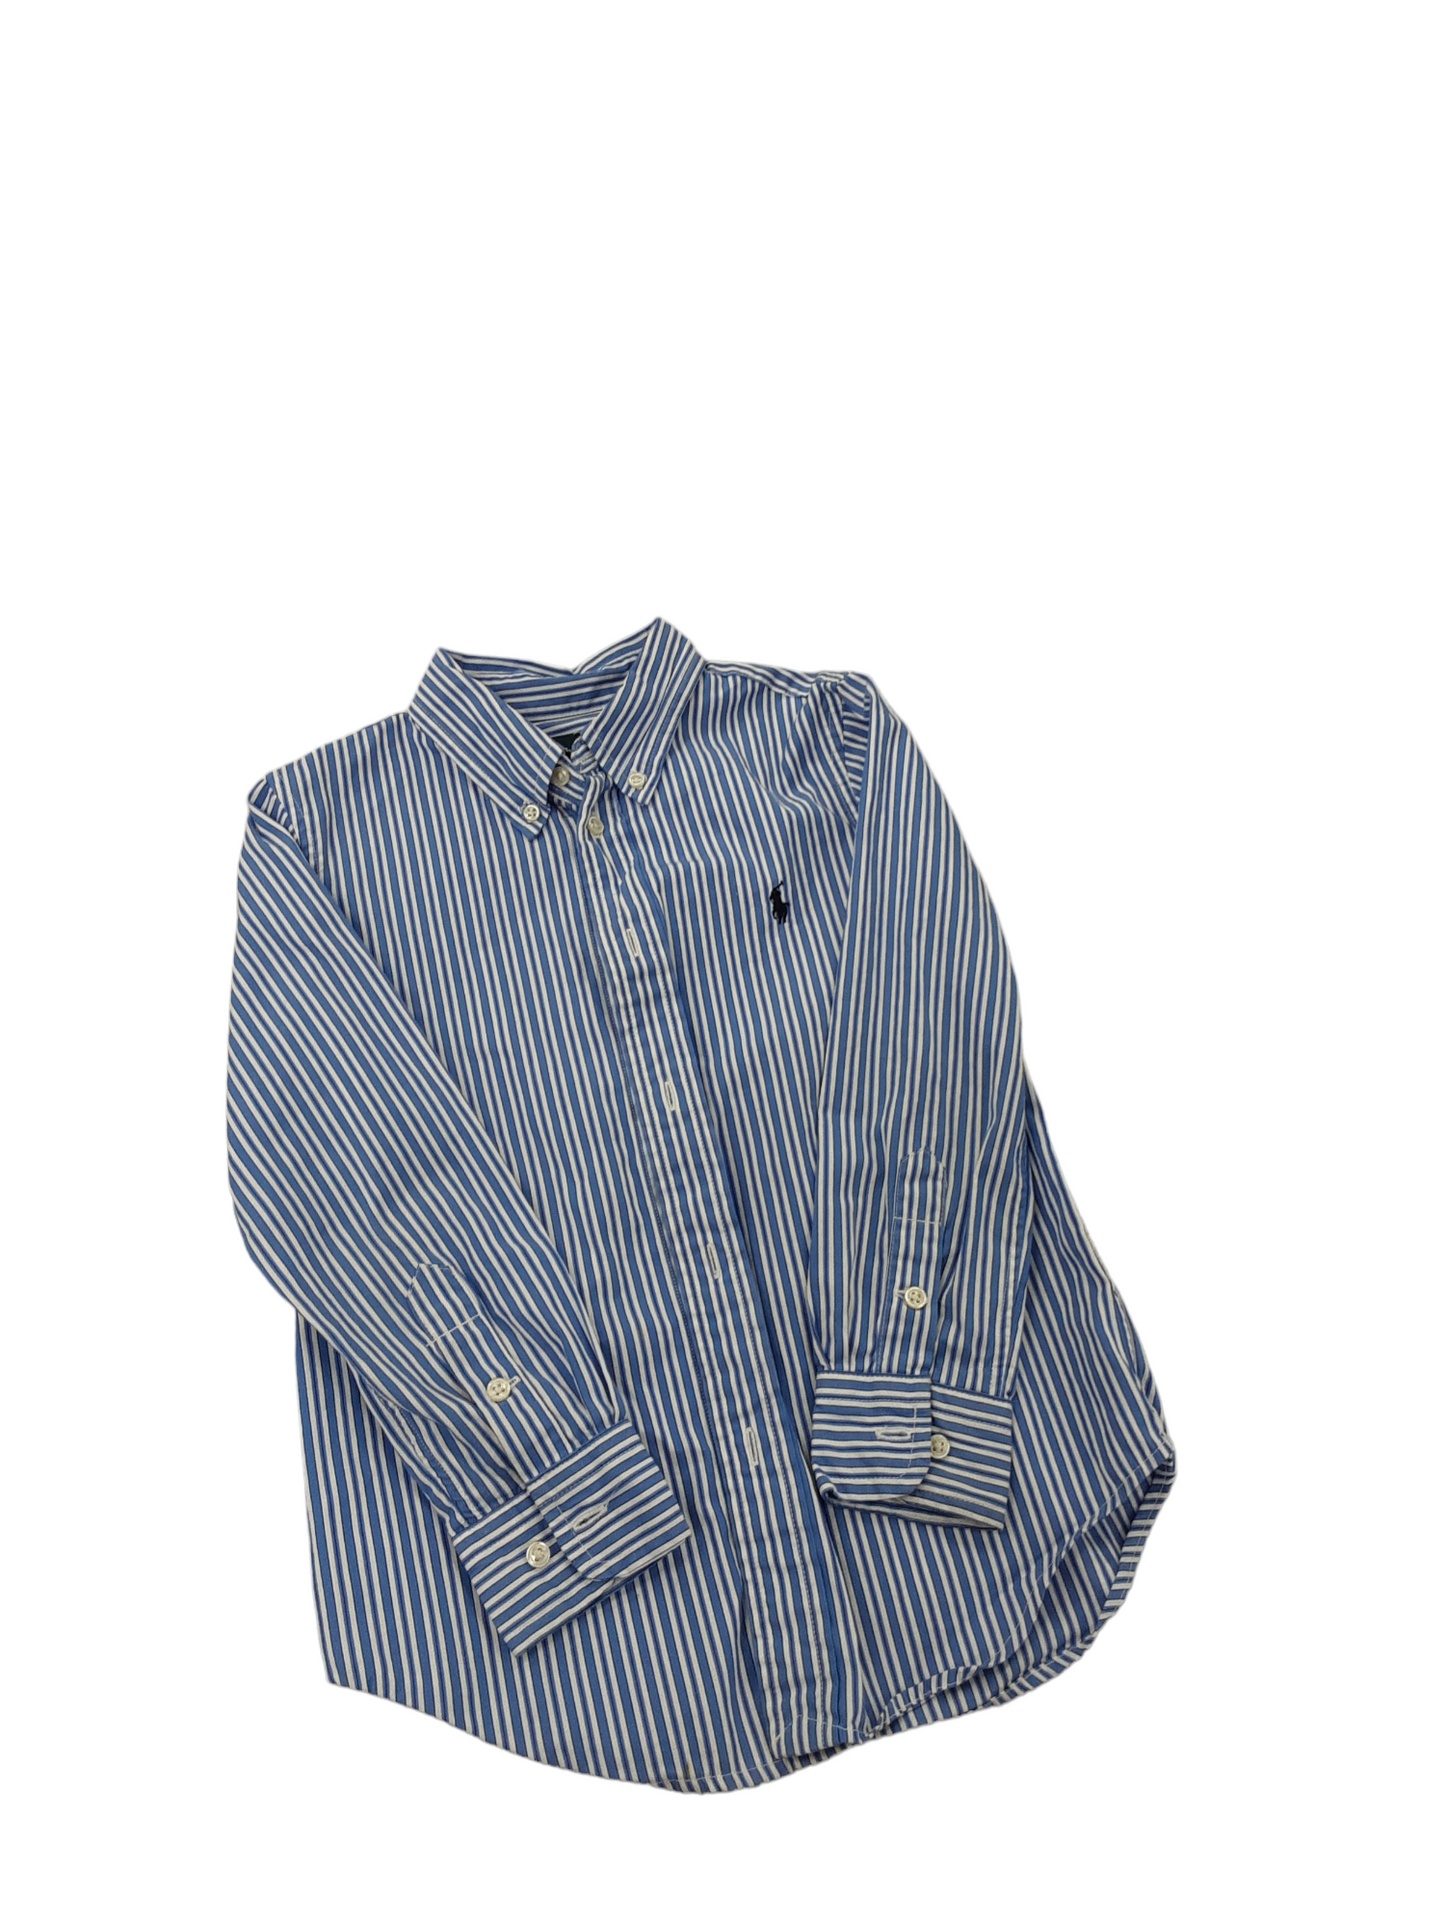 Funky striped button up 6